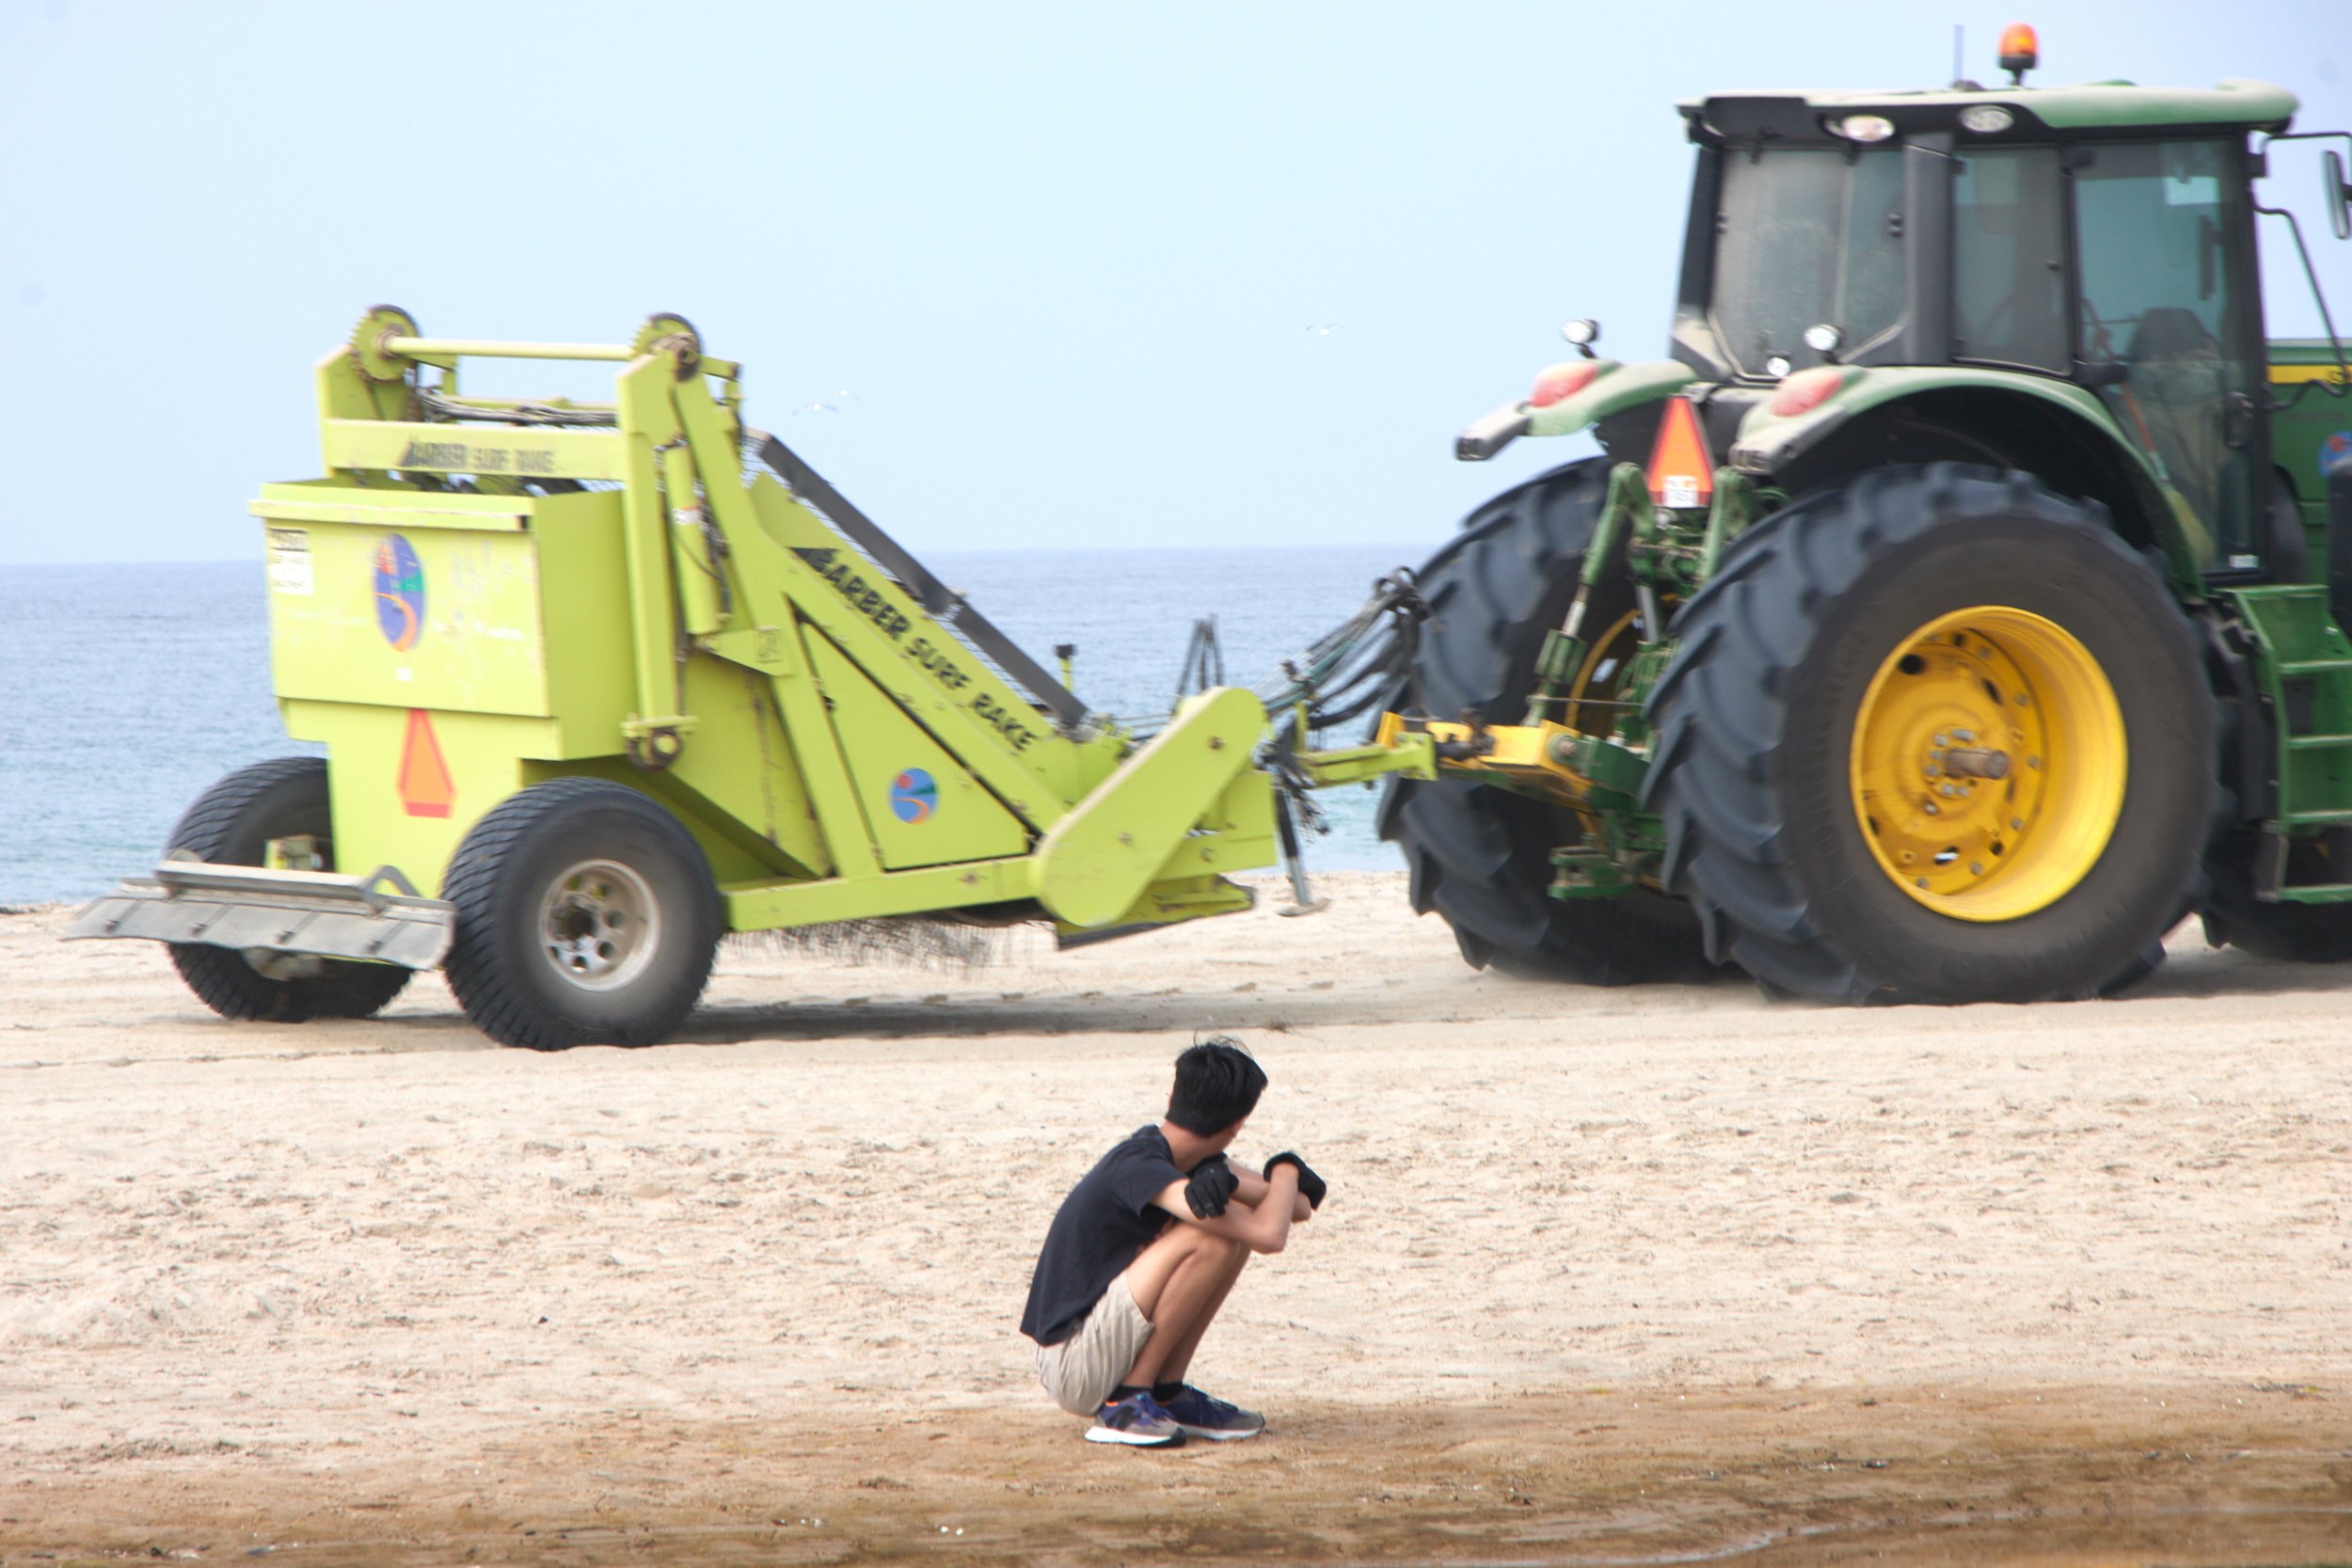  A volunteer squatting watches a tractor towing a beach cleaner drive past during a coastal beach cleanup organized by Santa Monica College Sustainability Center at The Inkwell, Santa Monica, Calif., on Sept 23, 2023. (Danniel Sumarkho | The Corsair)